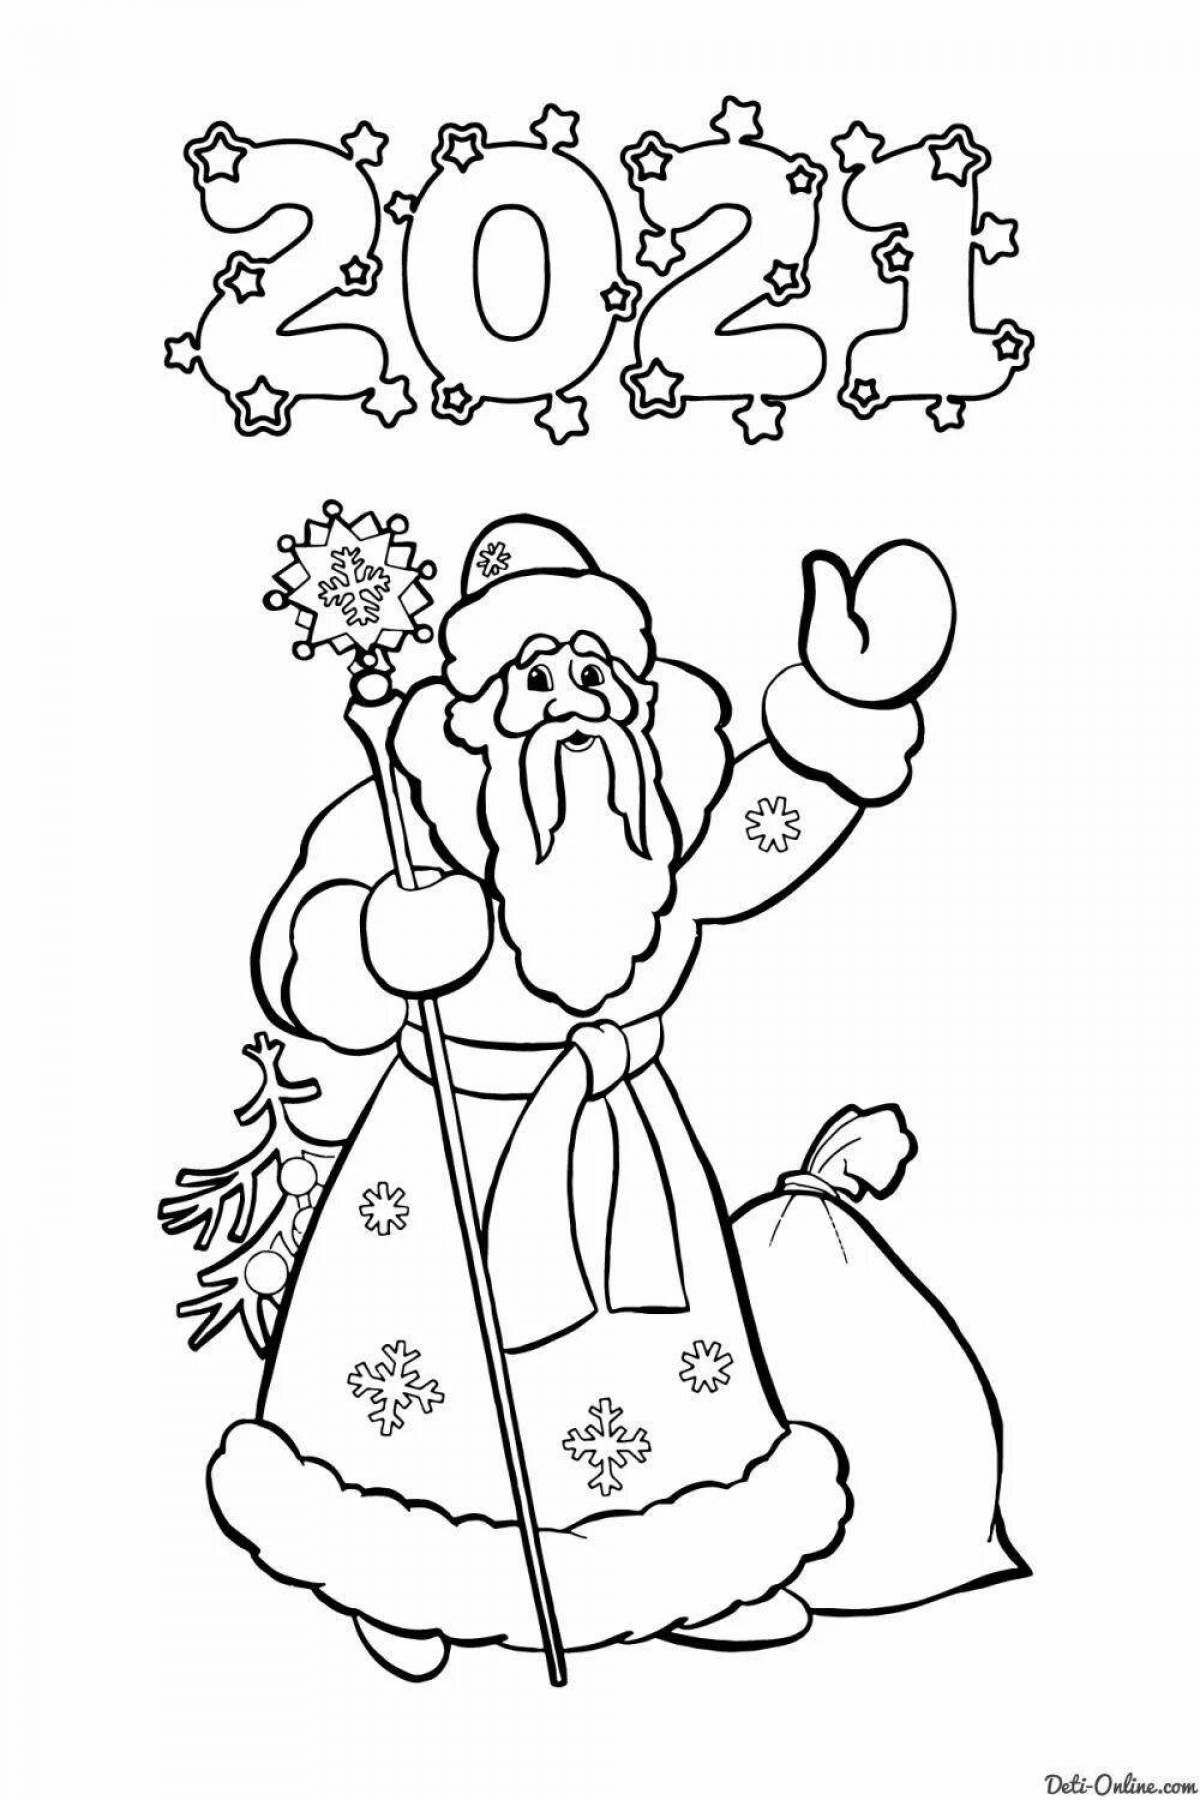 Bright Christmas coloring book for 8-9 year olds